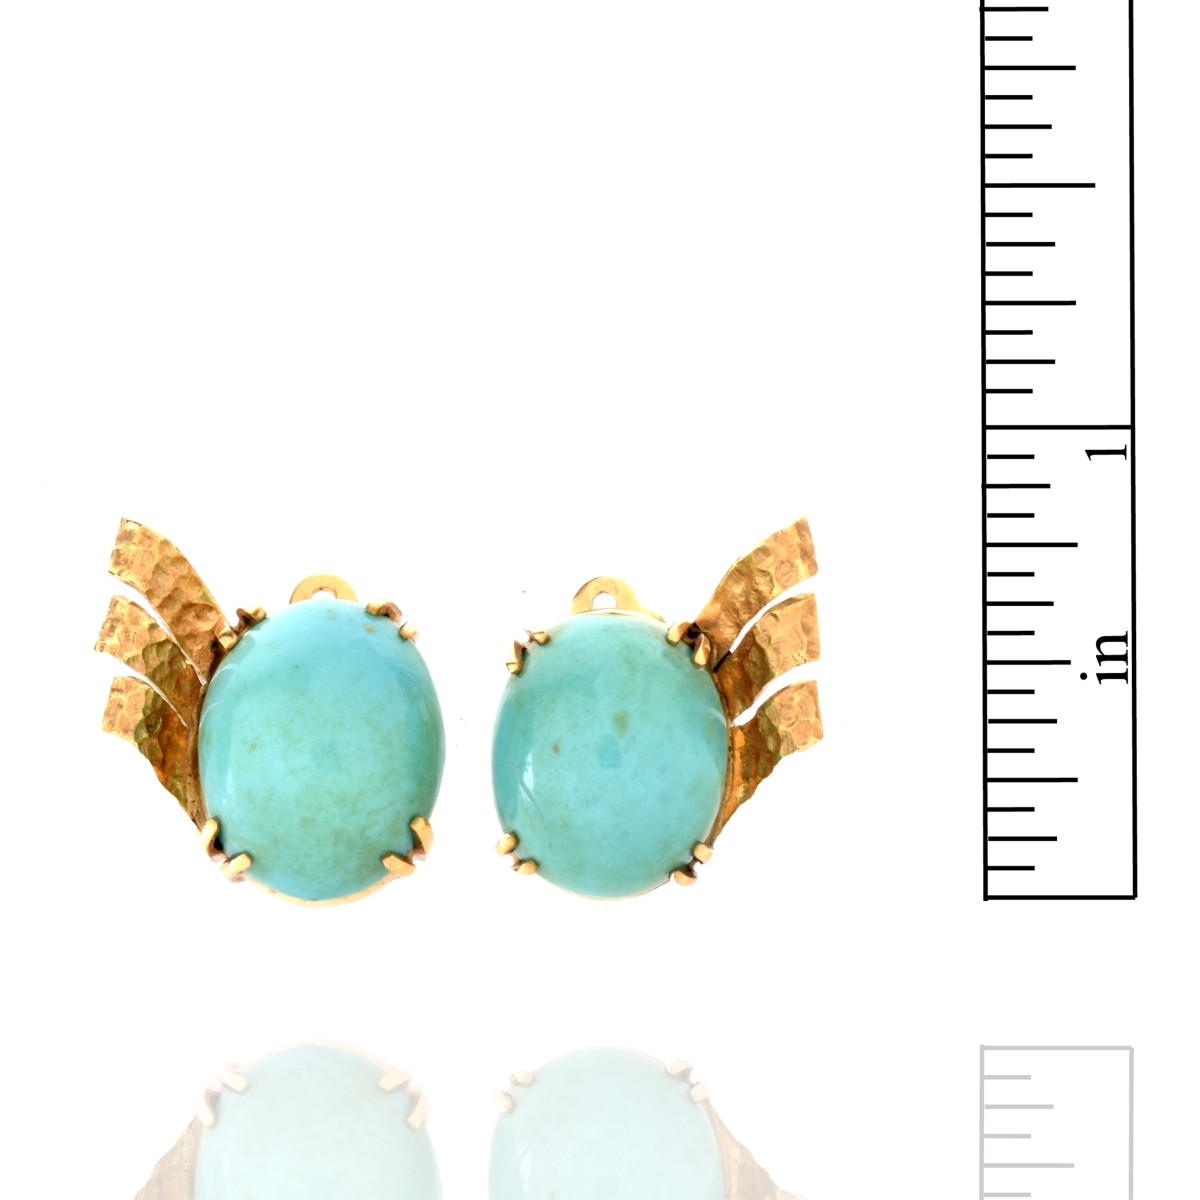 Turquoise and 14K Earrings